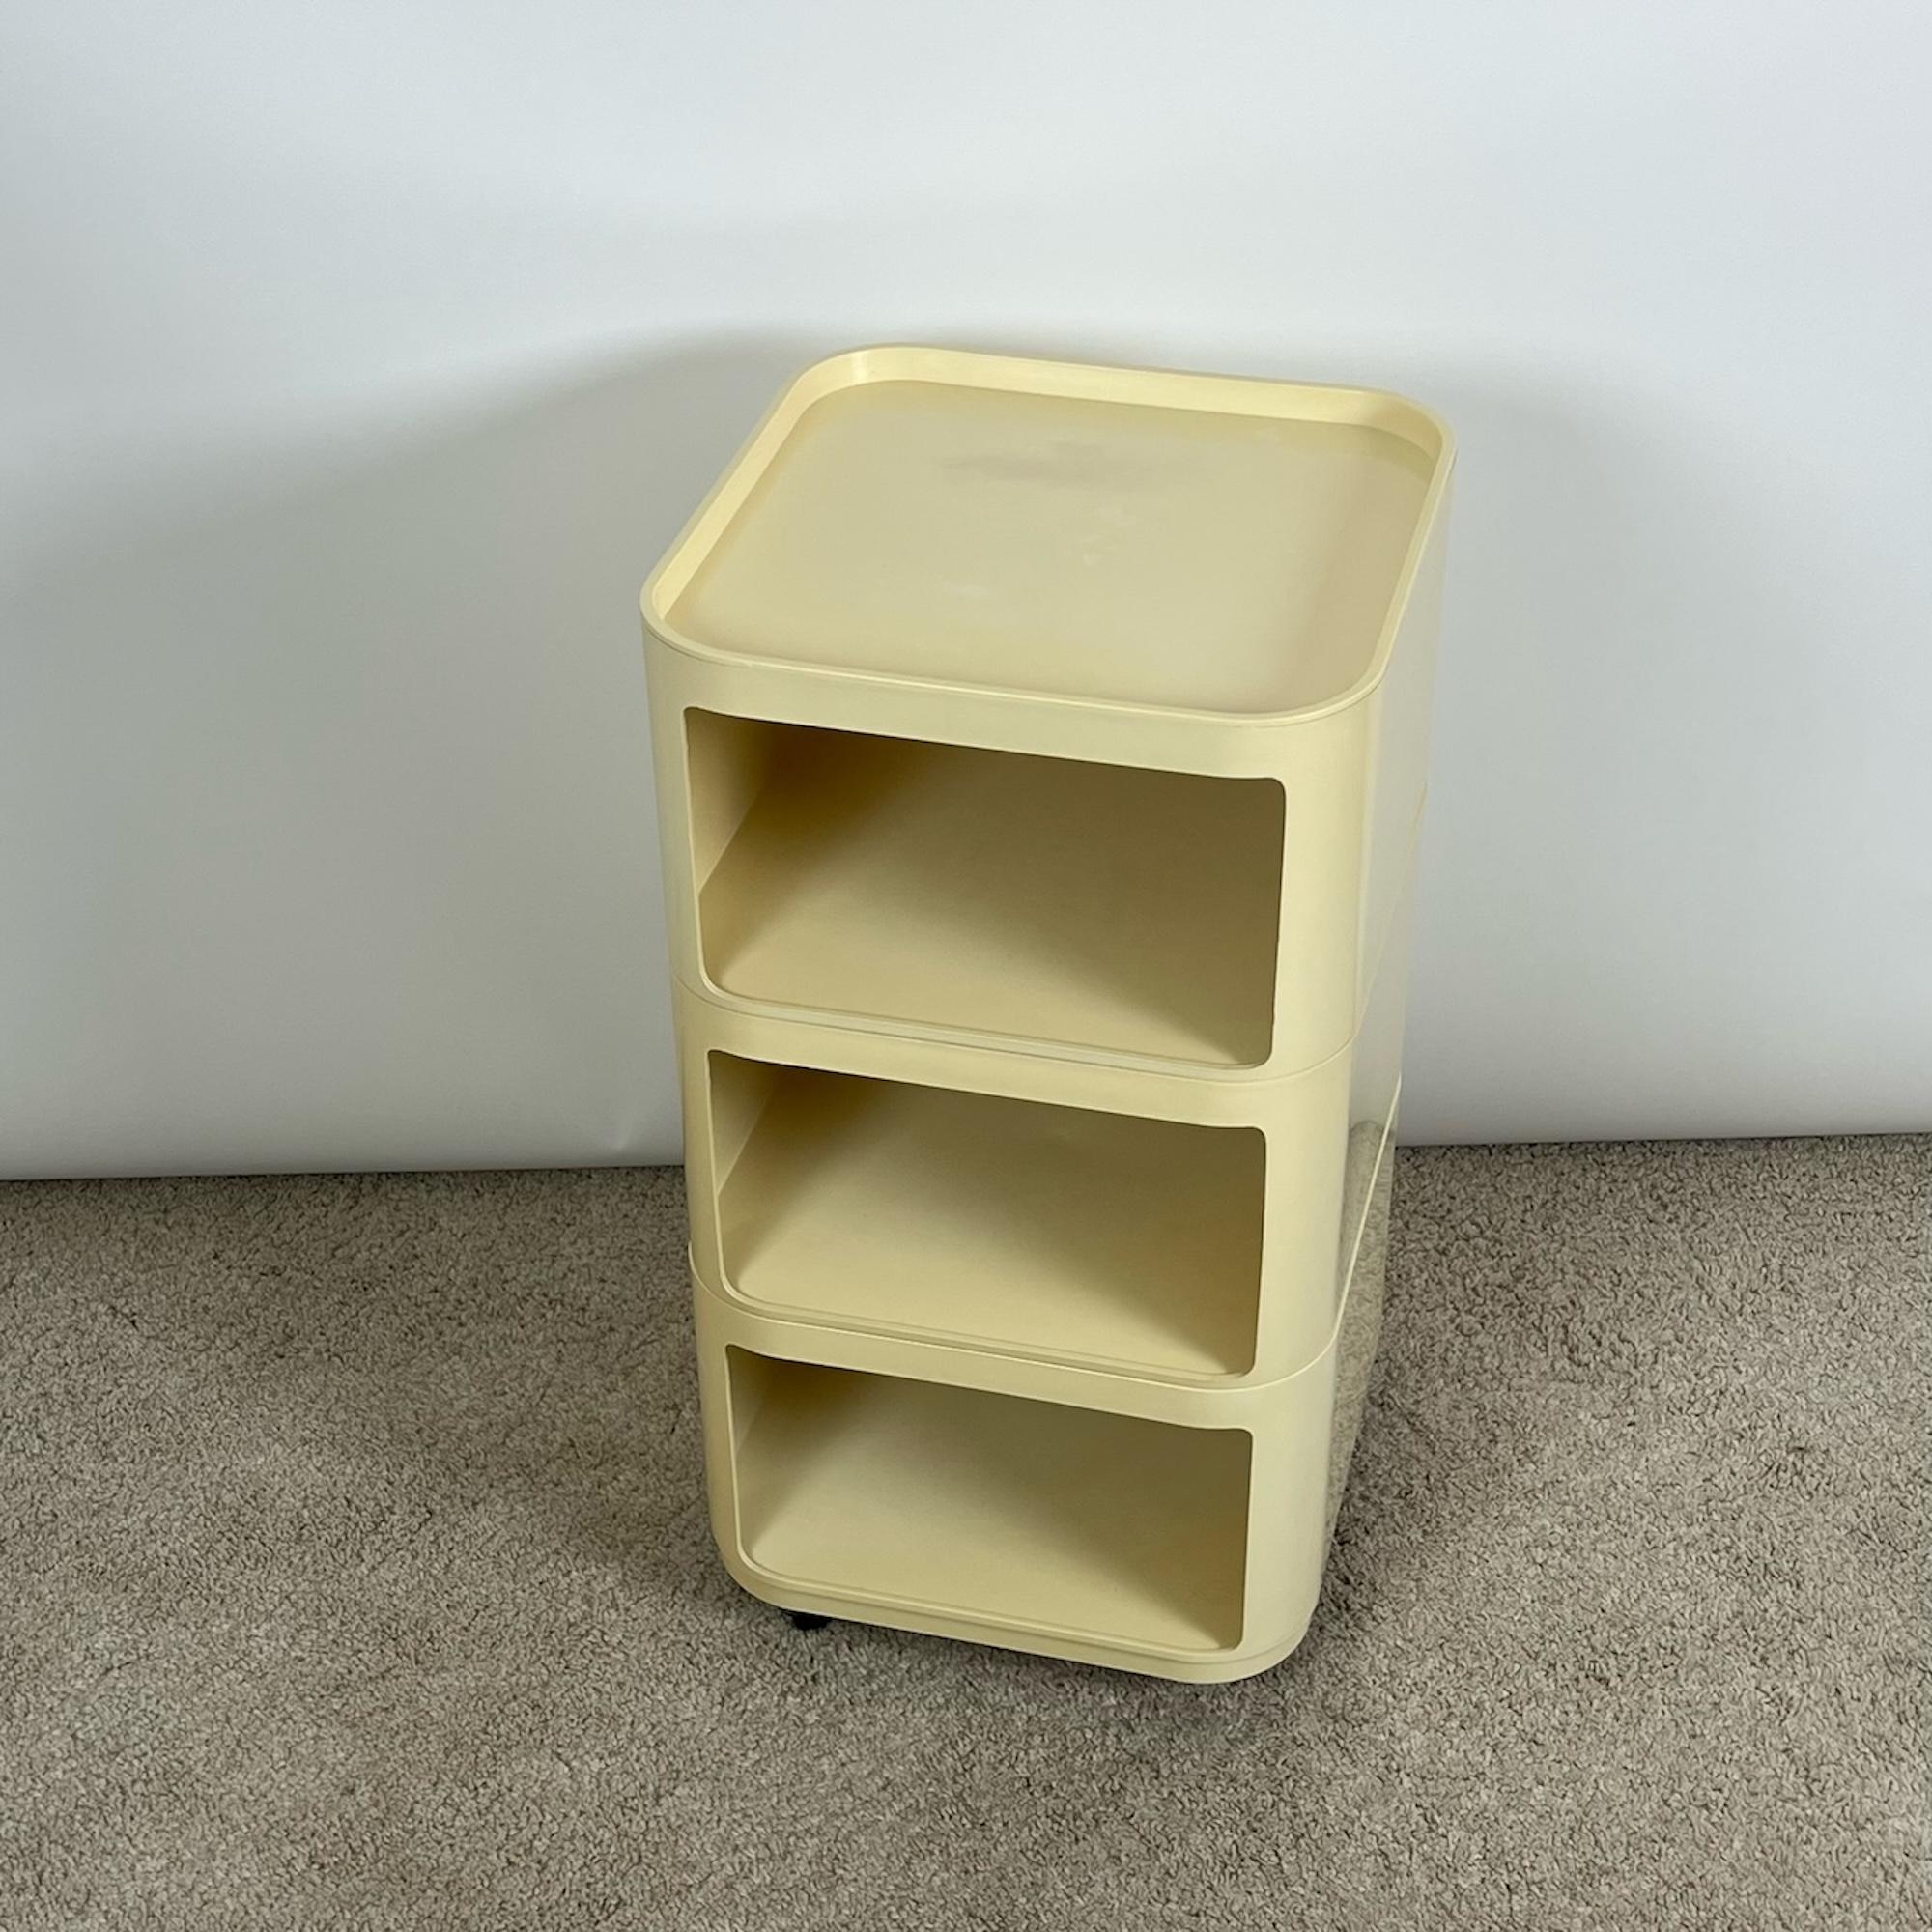 Componibili 4970 Cabinet Modules with Wheels by Anna Castelli for Kartell, 1960s For Sale 2